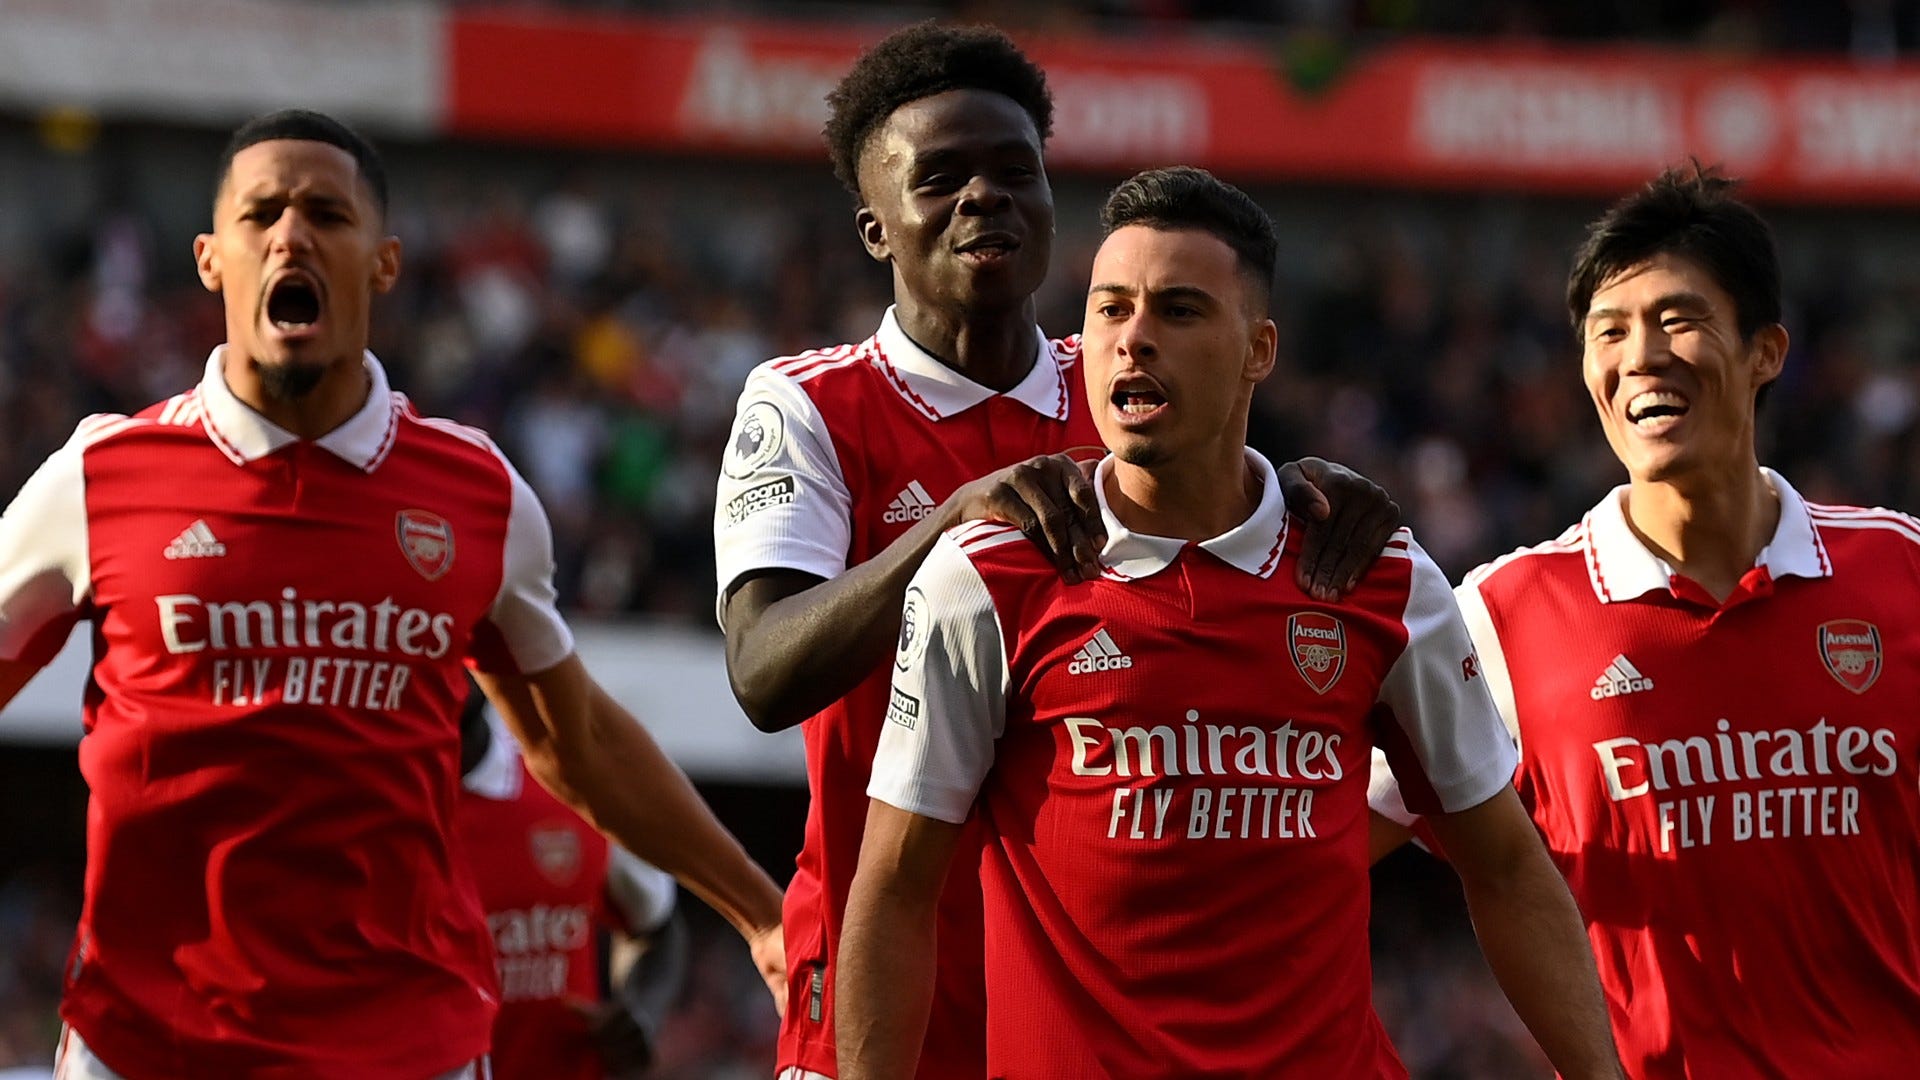 WATCH: Gone in 60 seconds! Martinelli finishes flowing Arsenal move inside  first minute against Liverpool | Goal.com